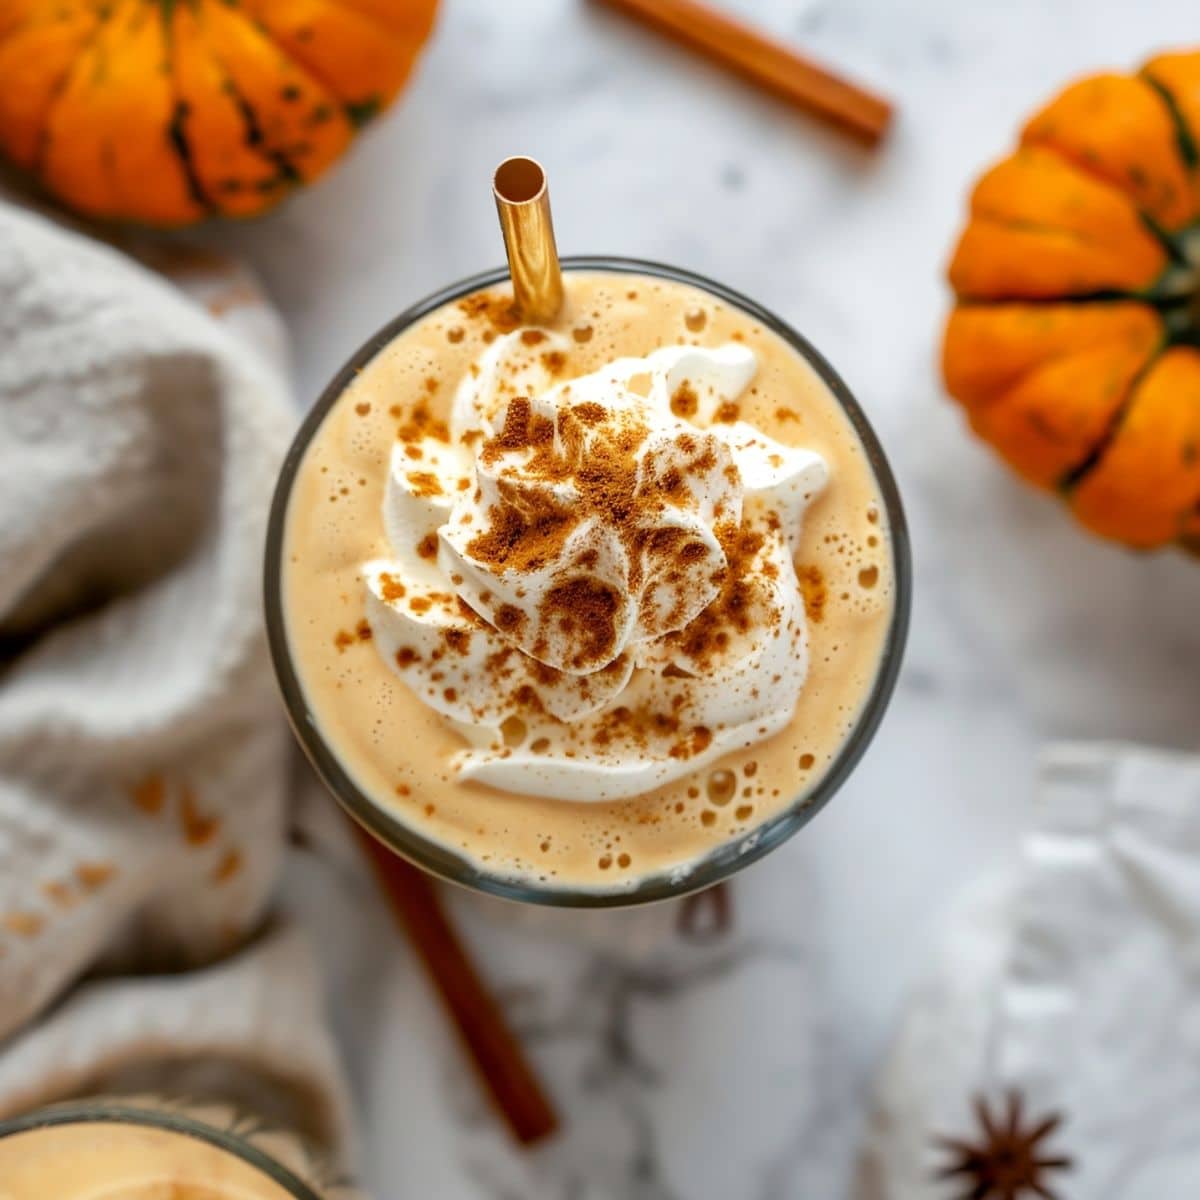 Top View Pumpkin Milkshake in a Glass with Whipped Cream, Cinnamon, and a Straw on a White Marble Table with Pumpkins and Cinnamon Sticks